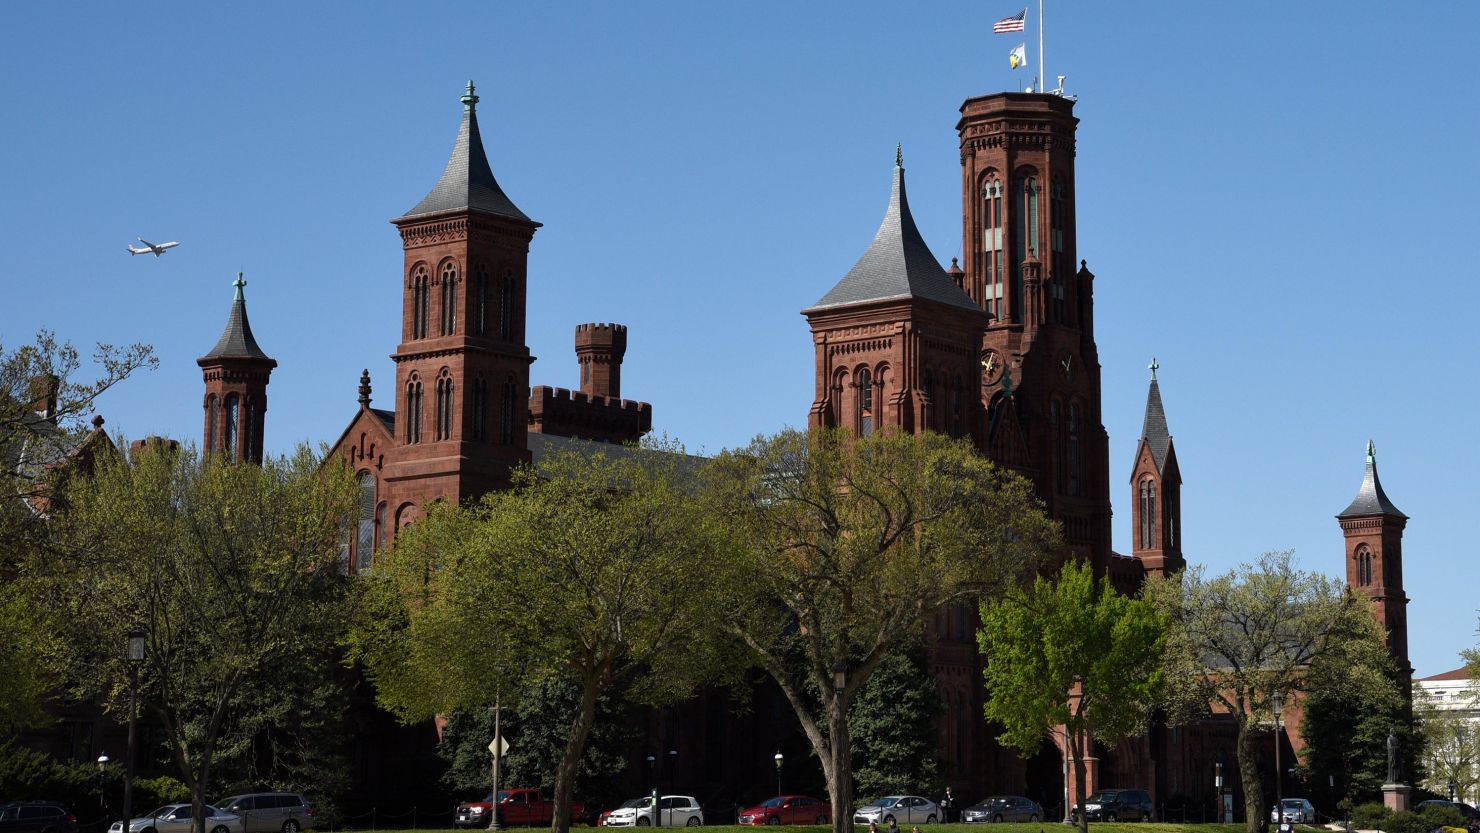 The Smithsonian Institution has been charged with creating a women's history museum.